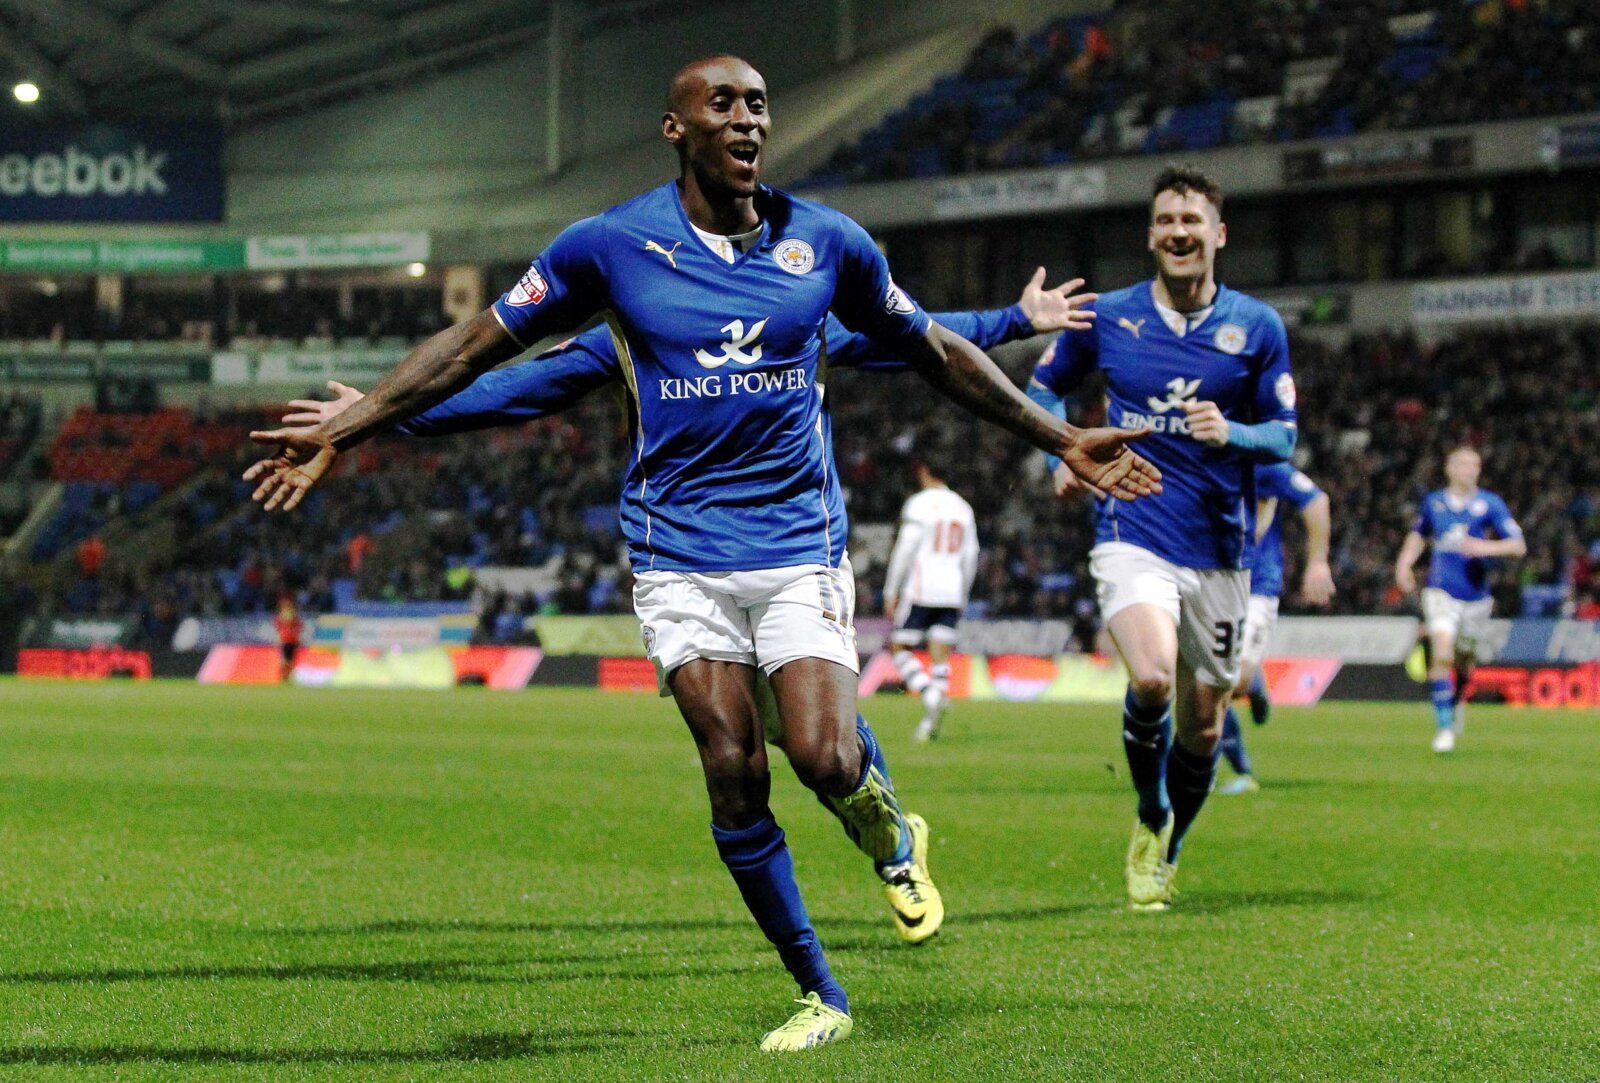 Football - Bolton Wanderers v Leicester City - Sky Bet Football League Championship - The Reebok Stadium - 22/4/14 
Lloyd Dyer celebrates after scoring the first goal for Leicester City 
Mandatory Credit: Action Images / Ed Sykes 
Livepic 
EDITORIAL USE ONLY. No use with unauthorized audio, video, data, fixture lists, club/league logos or 